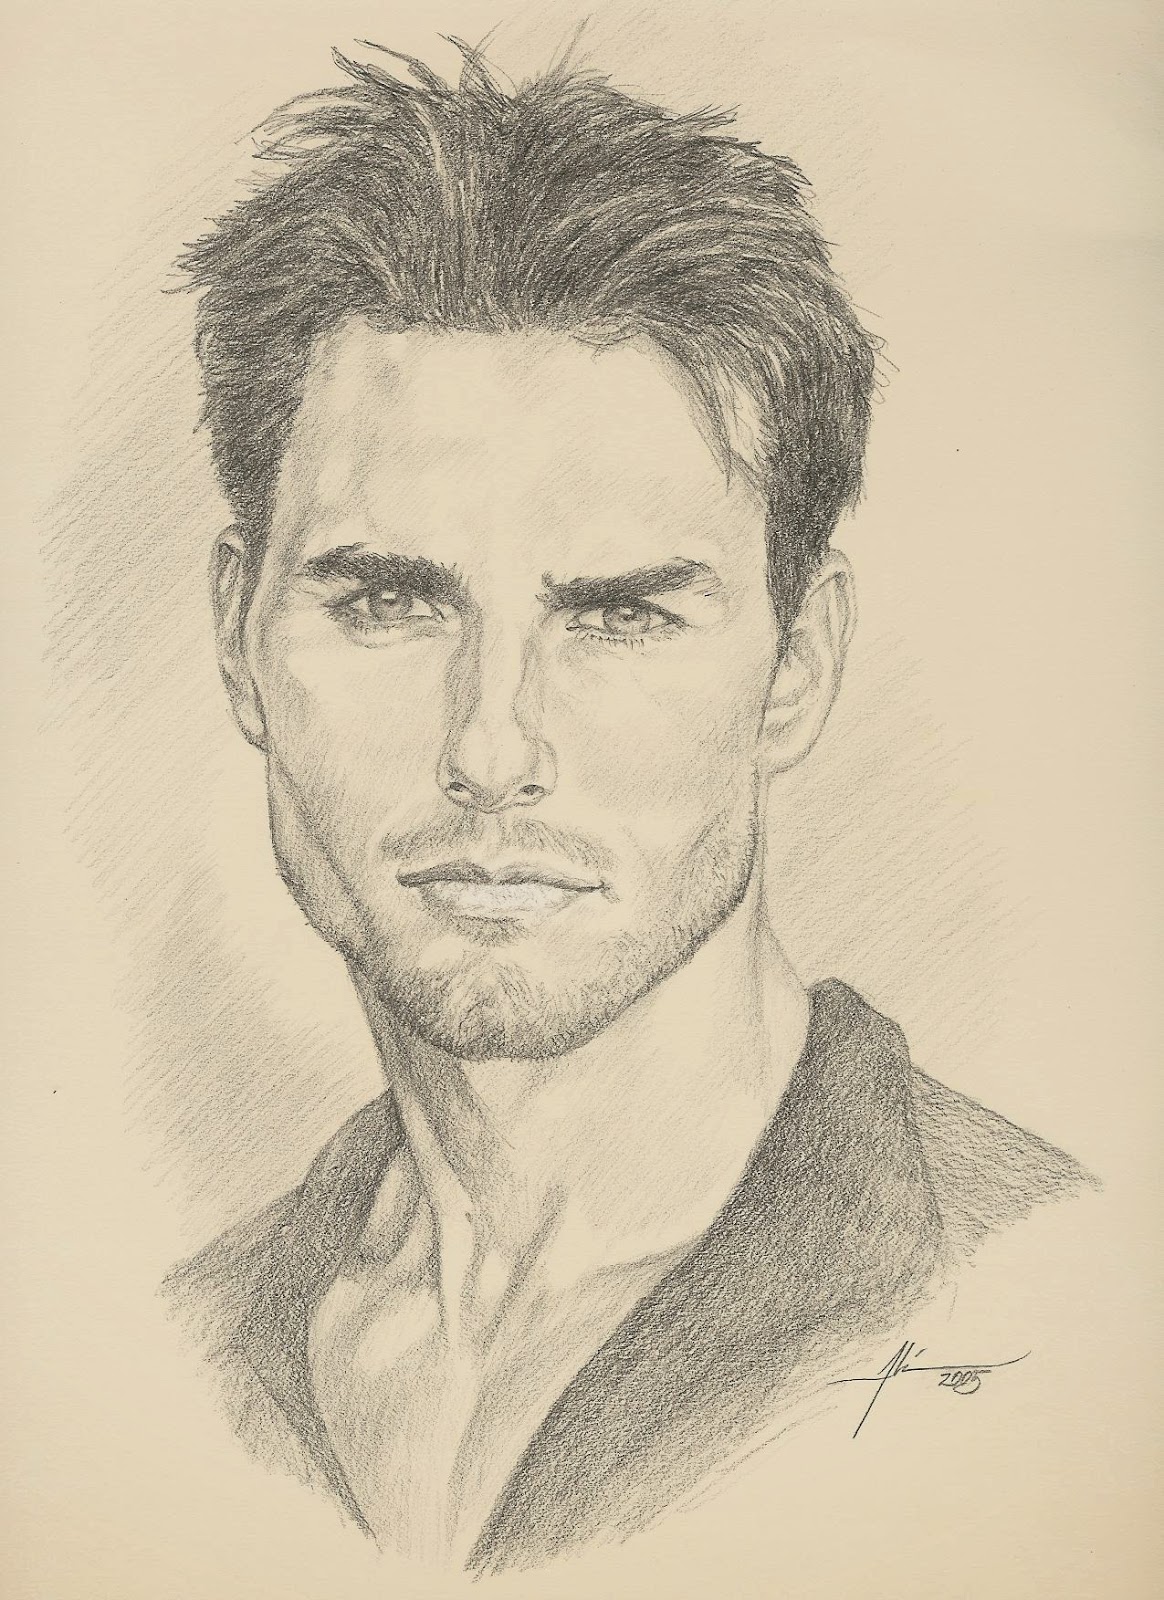 All Sorts of Art by Ali: A Portrait of Tom Cruise